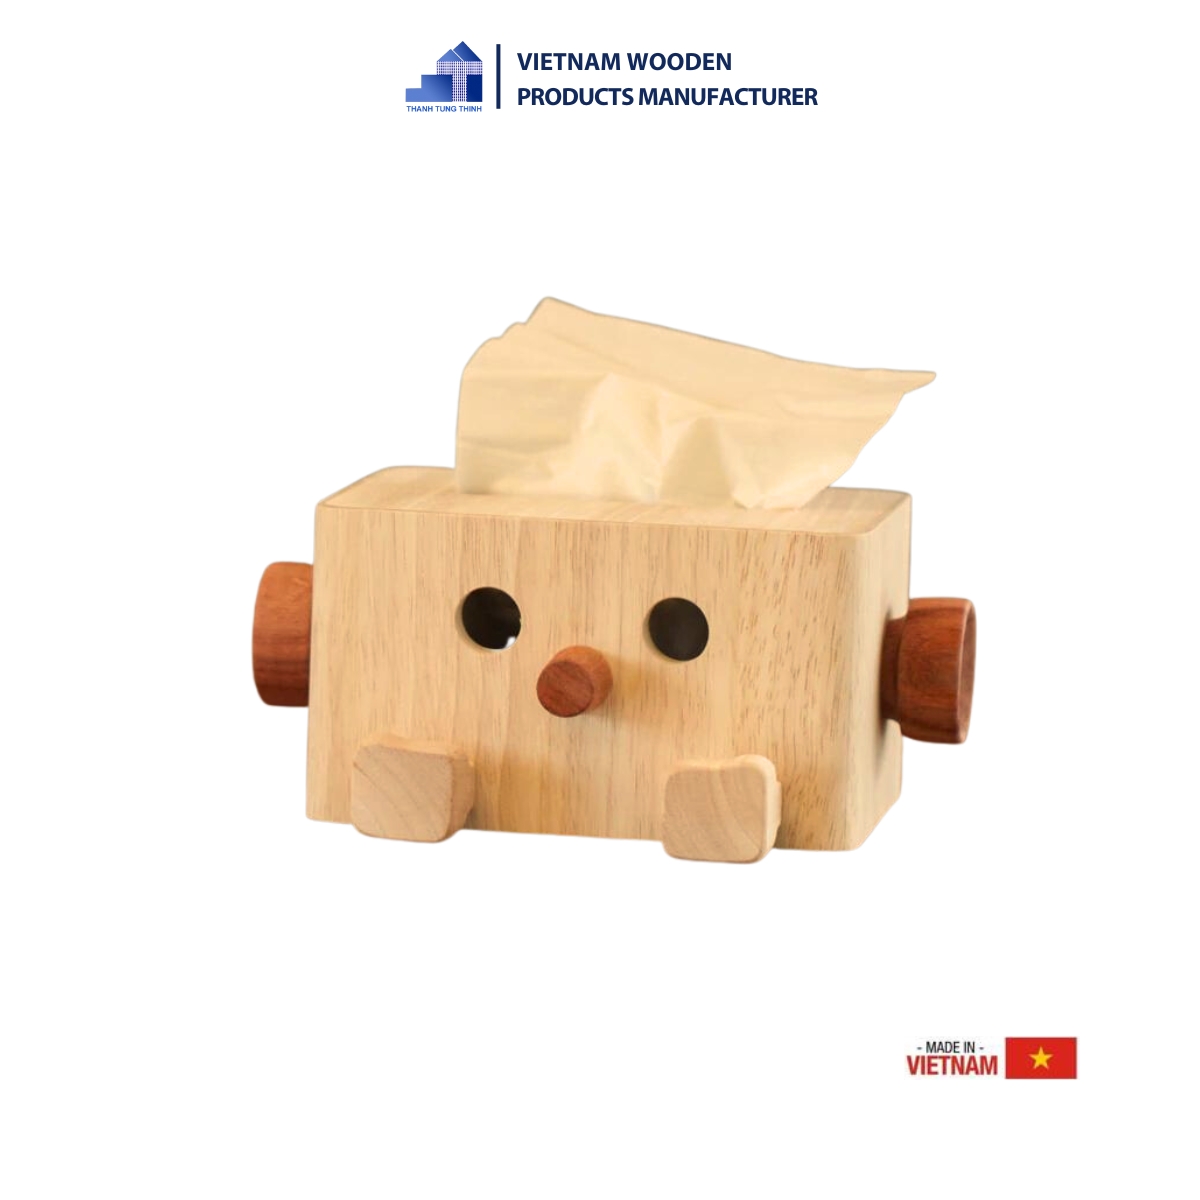 Wooden tissue box with cute shape [WTSB01]